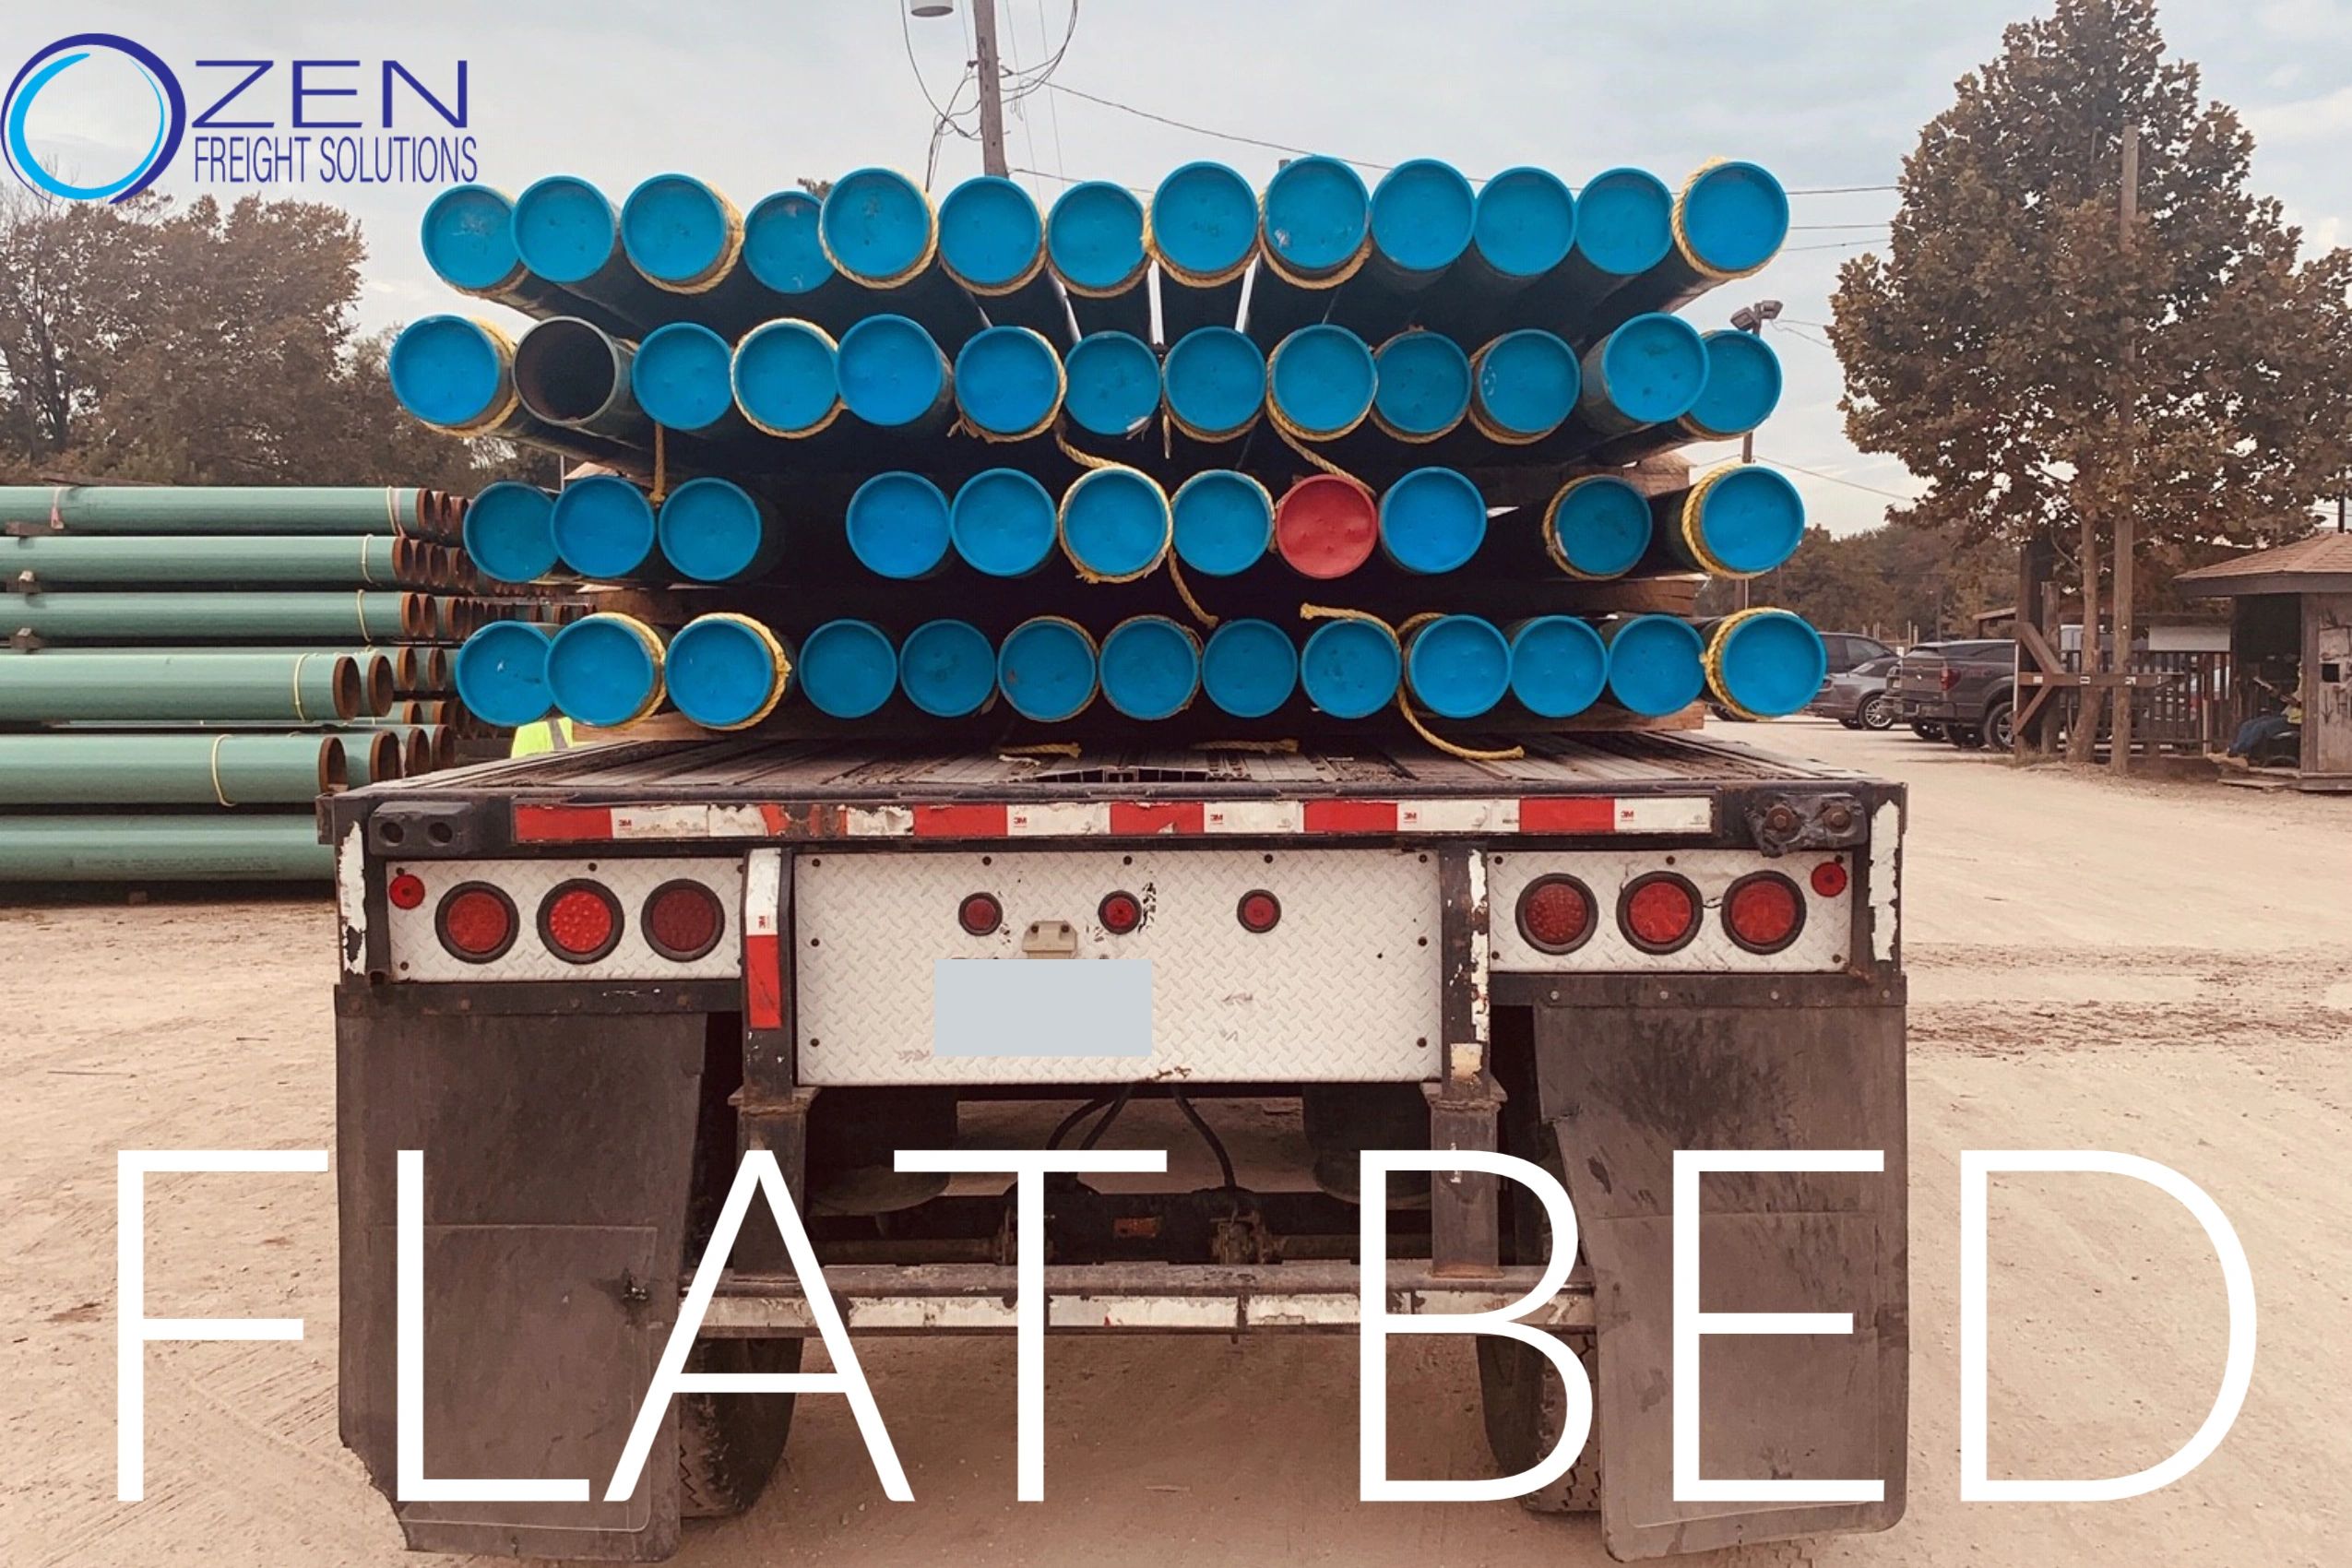 Rearview of a flatbed truck hauling tubes